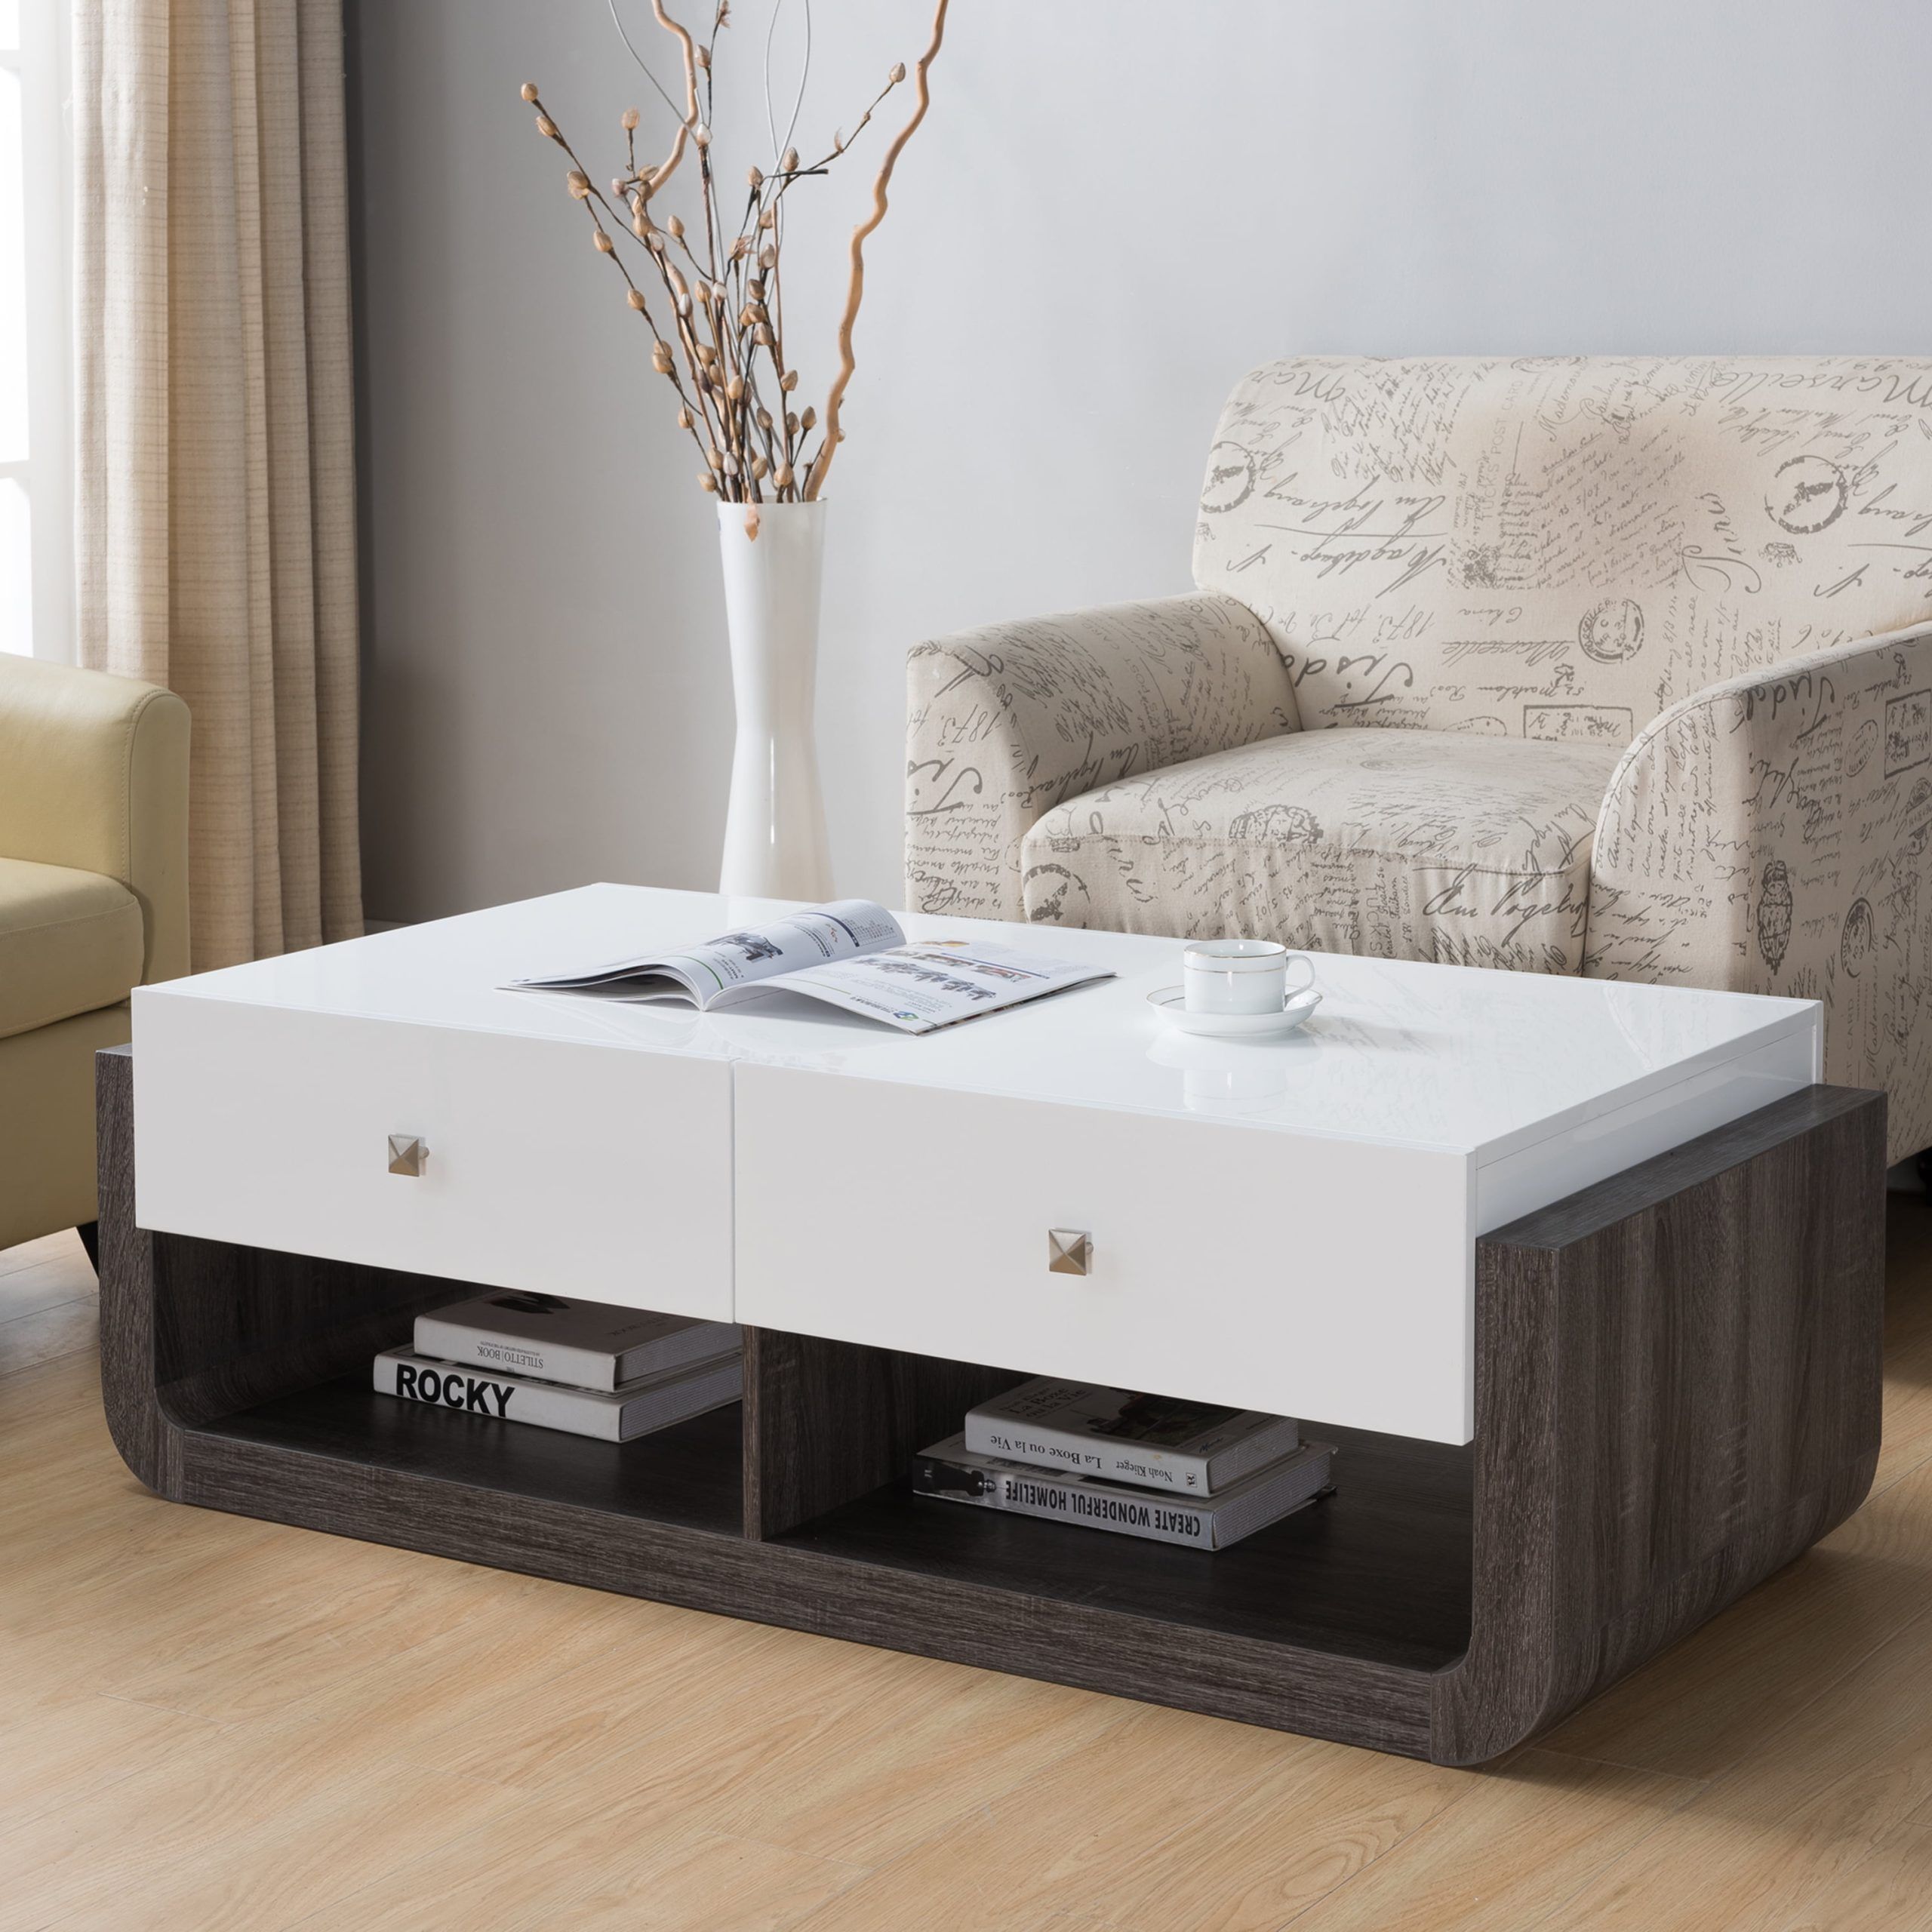 Furniture Of America Bealina Contemporary Multi Storage Coffee Table Throughout Modern Coffee Tables With Hidden Storage Compartments (View 18 of 20)